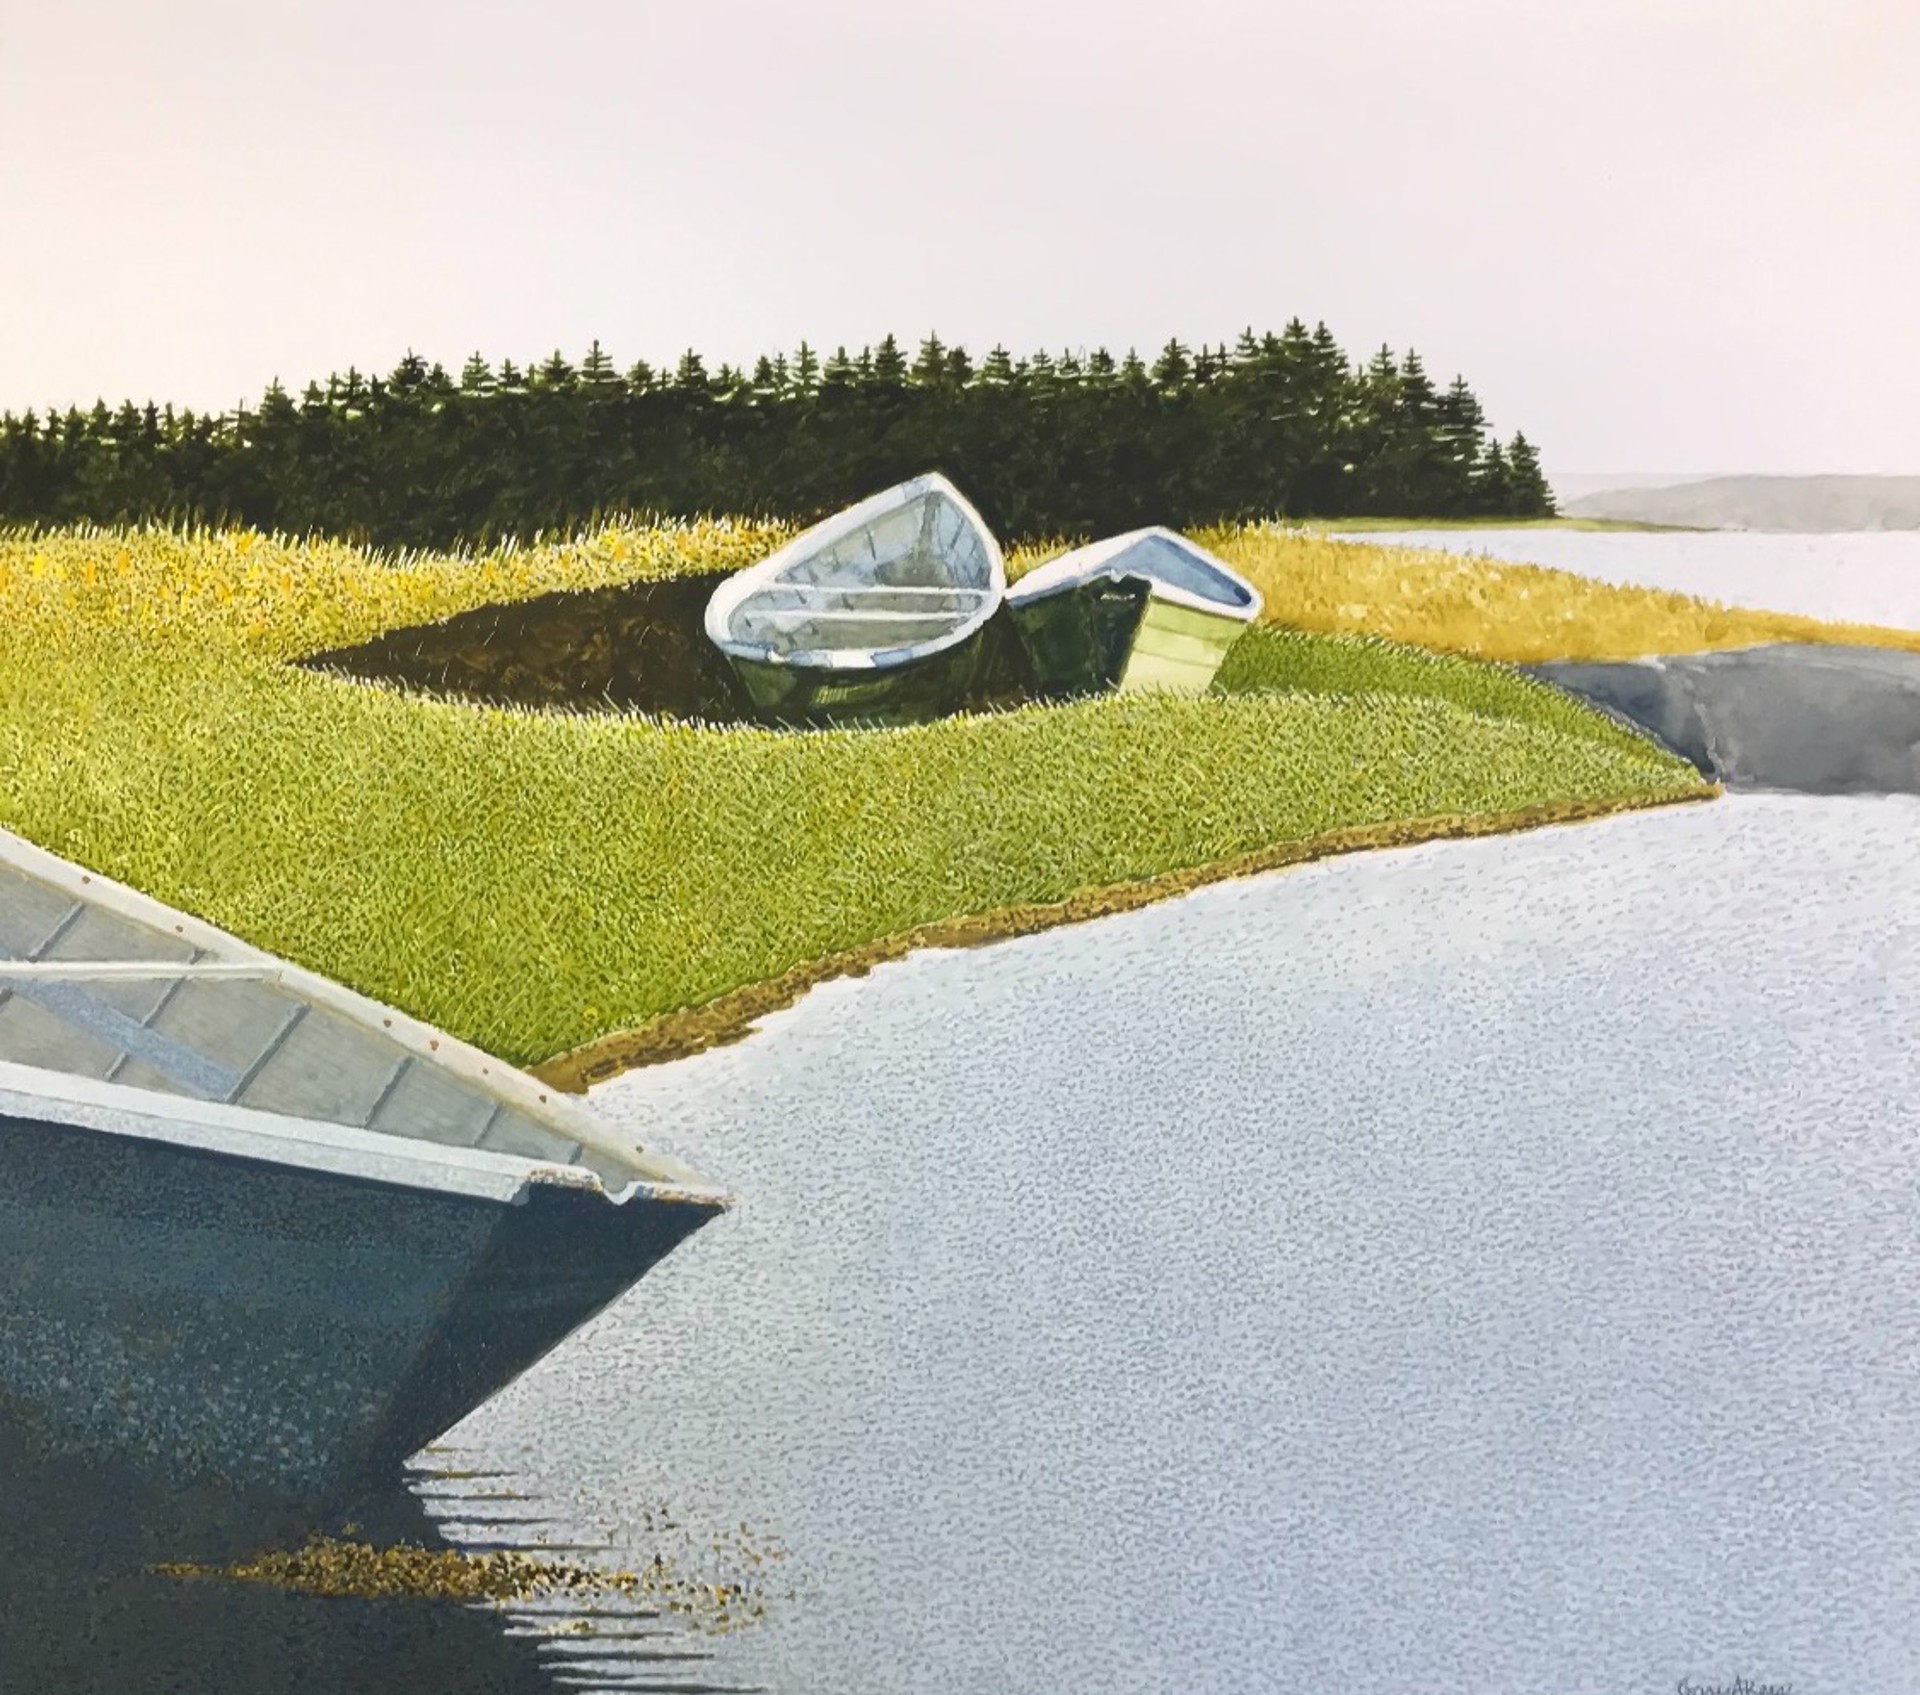 Dories at Spruce Head by Gary Akers